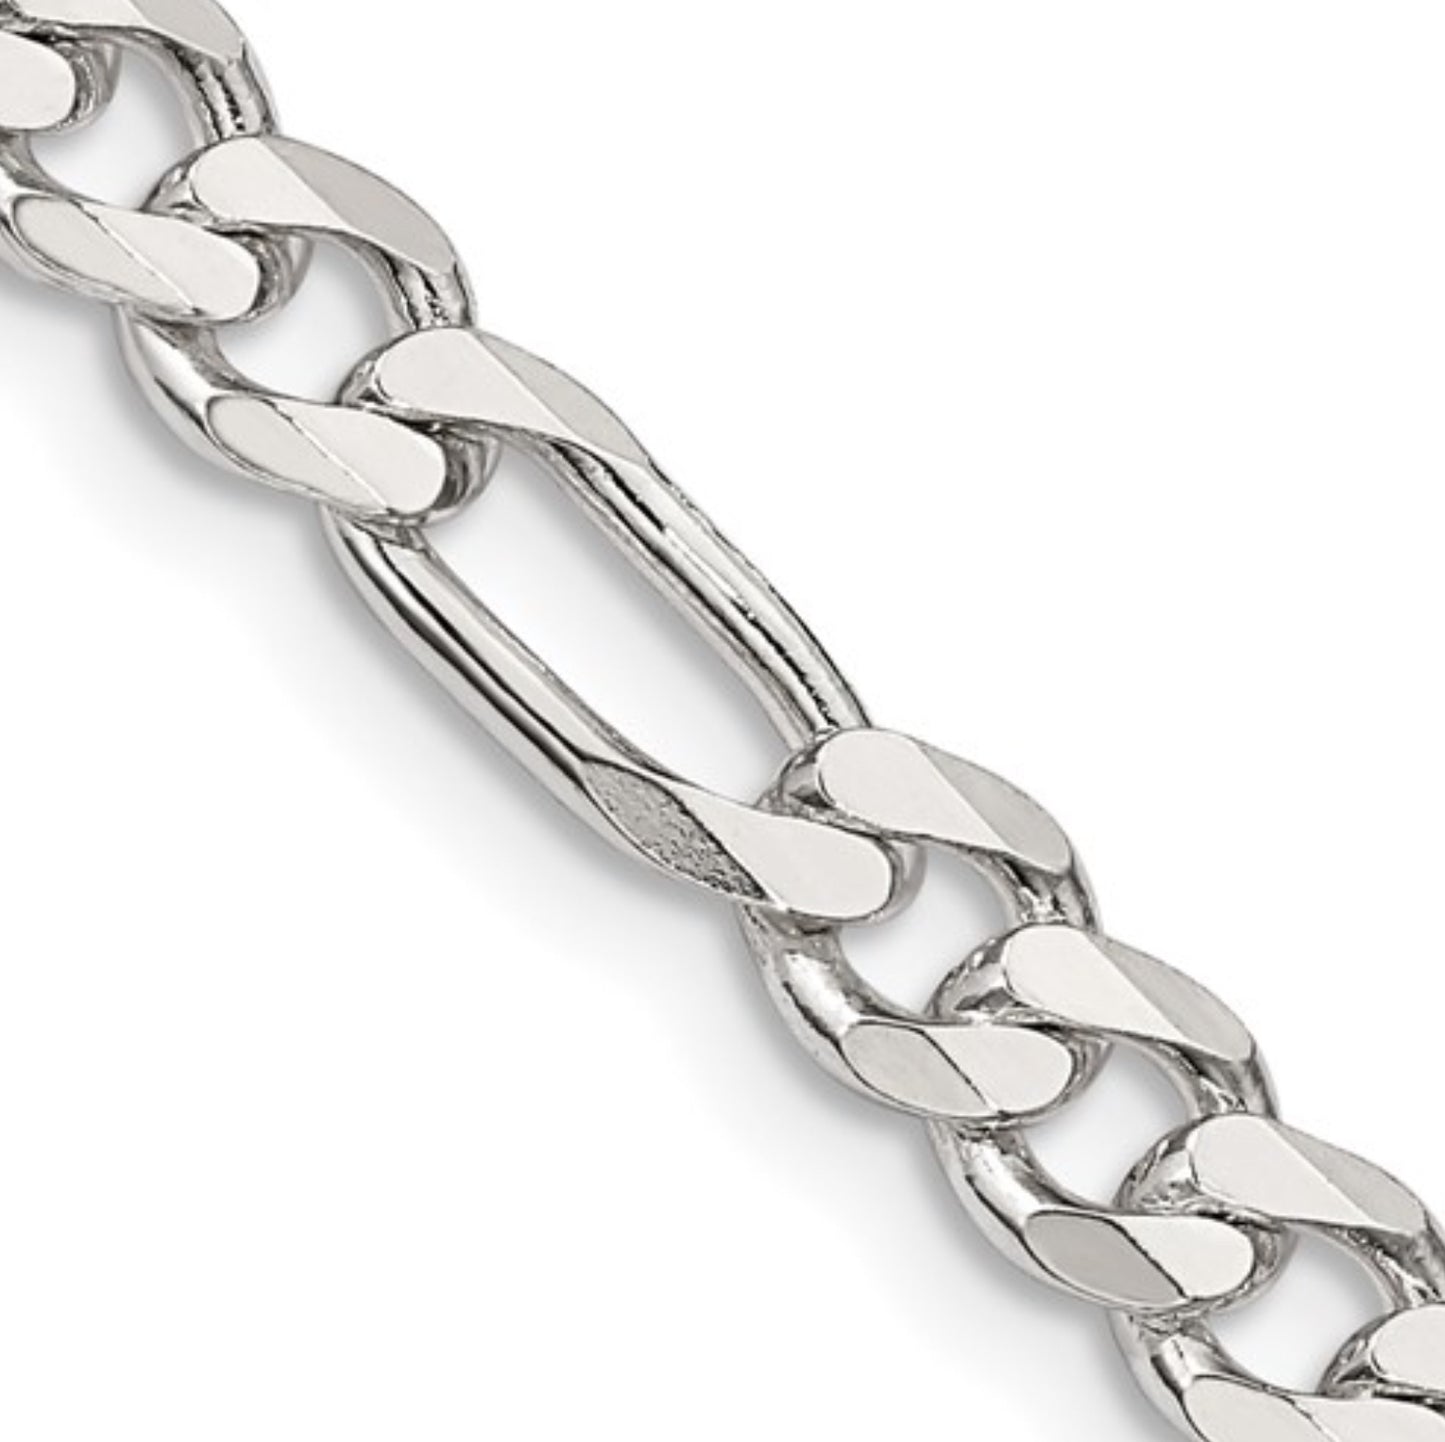 Sterling Silver 5.5mm Figaro Chain